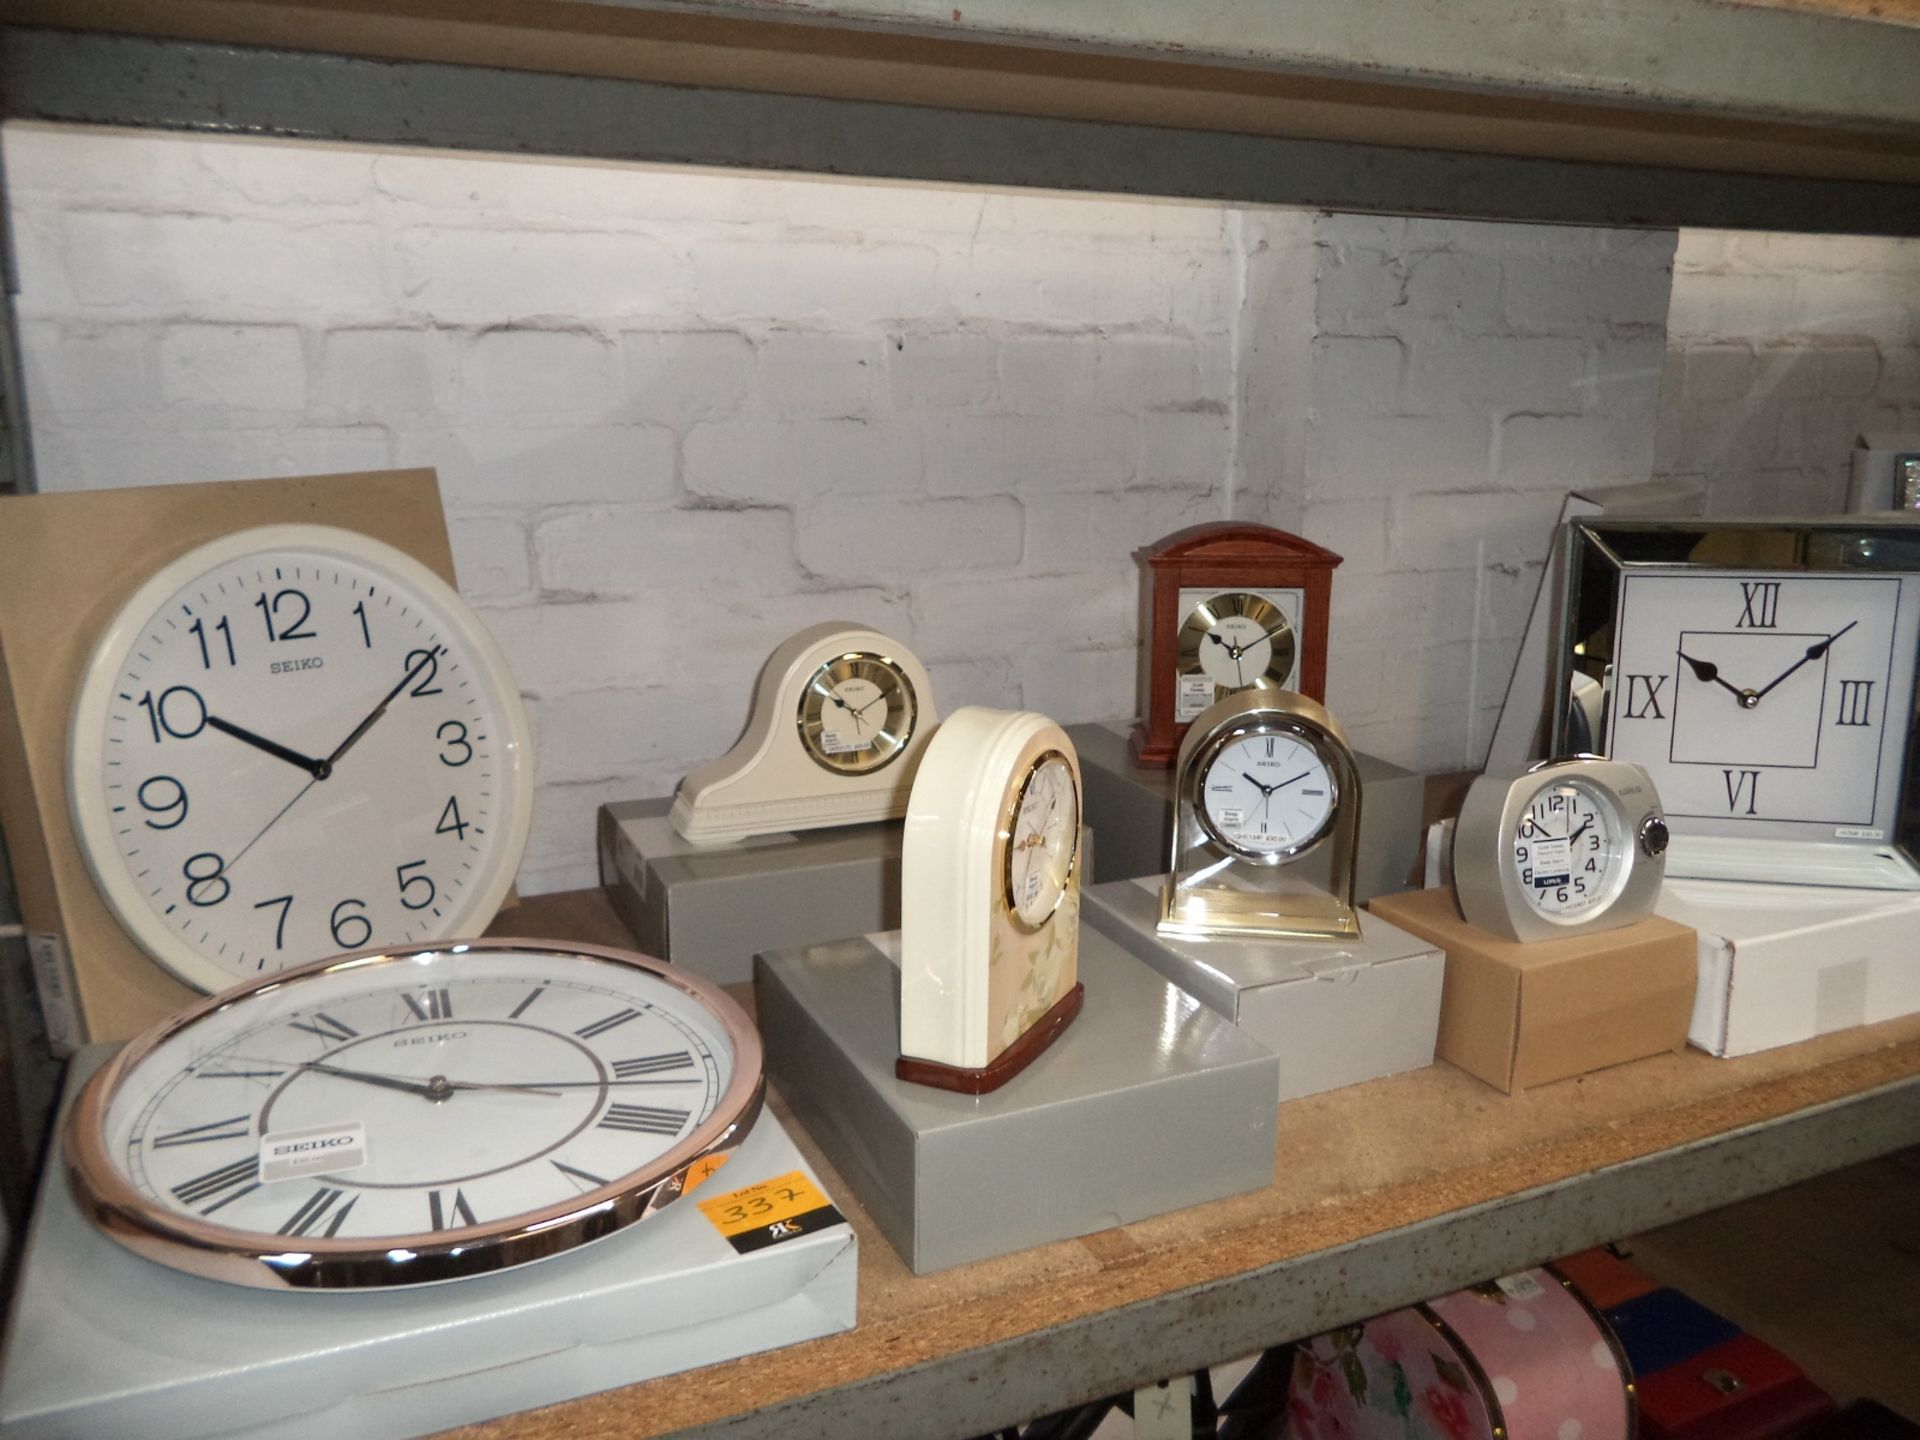 8 off mostly Seiko carriage & wall clocks plus Lorus alarm clock with RRPs up to £90 per clock